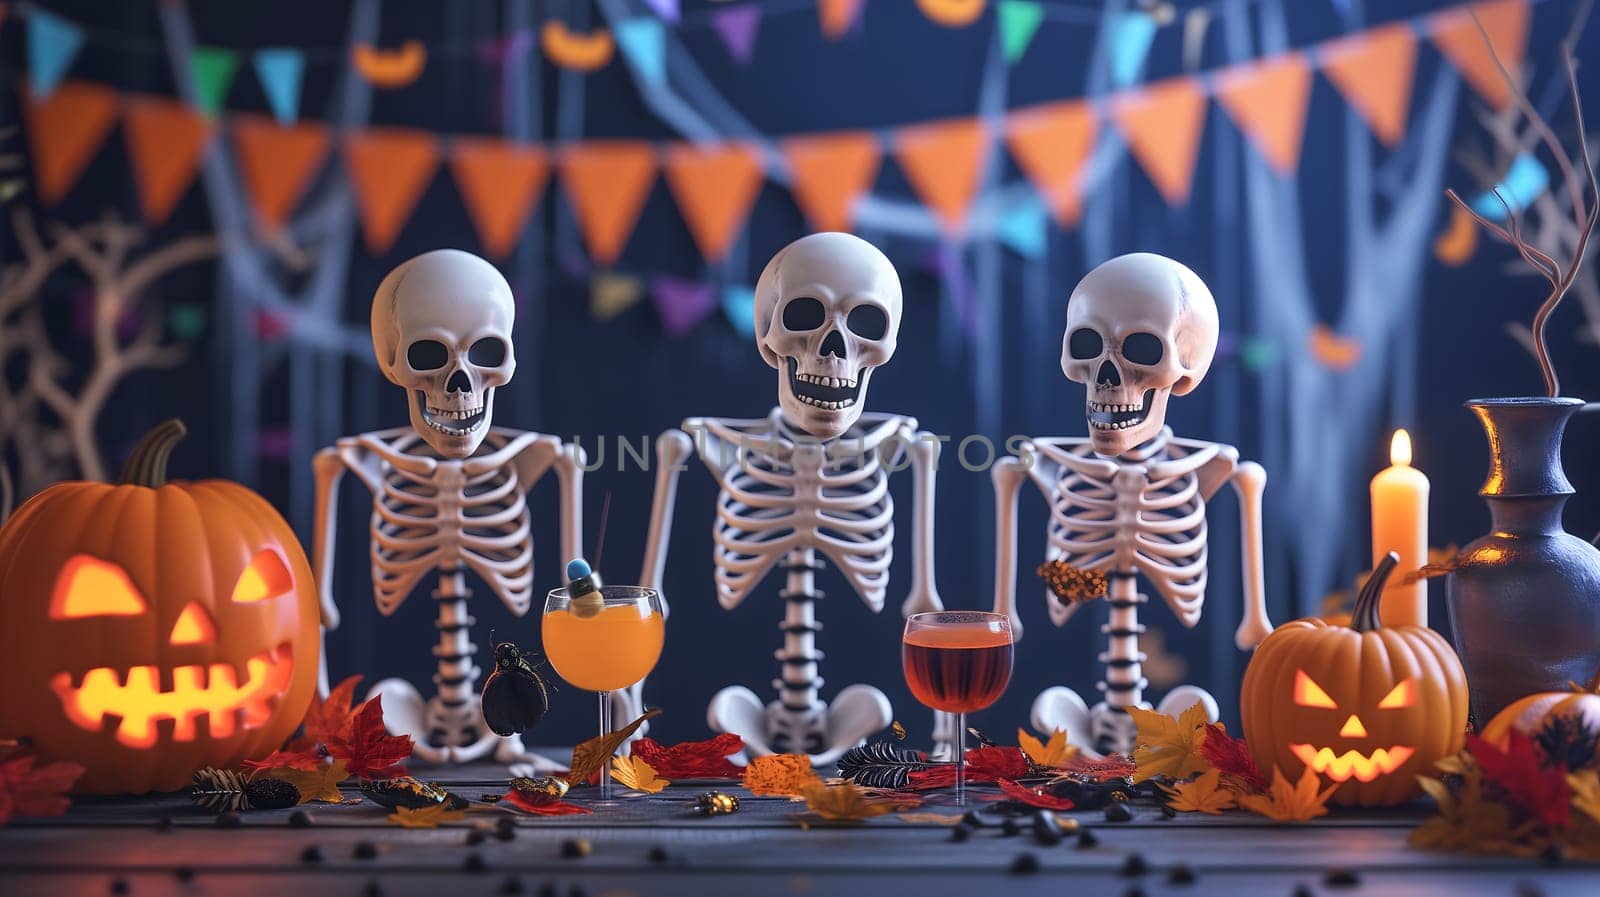 Skeletons having a Halloween party by z1b